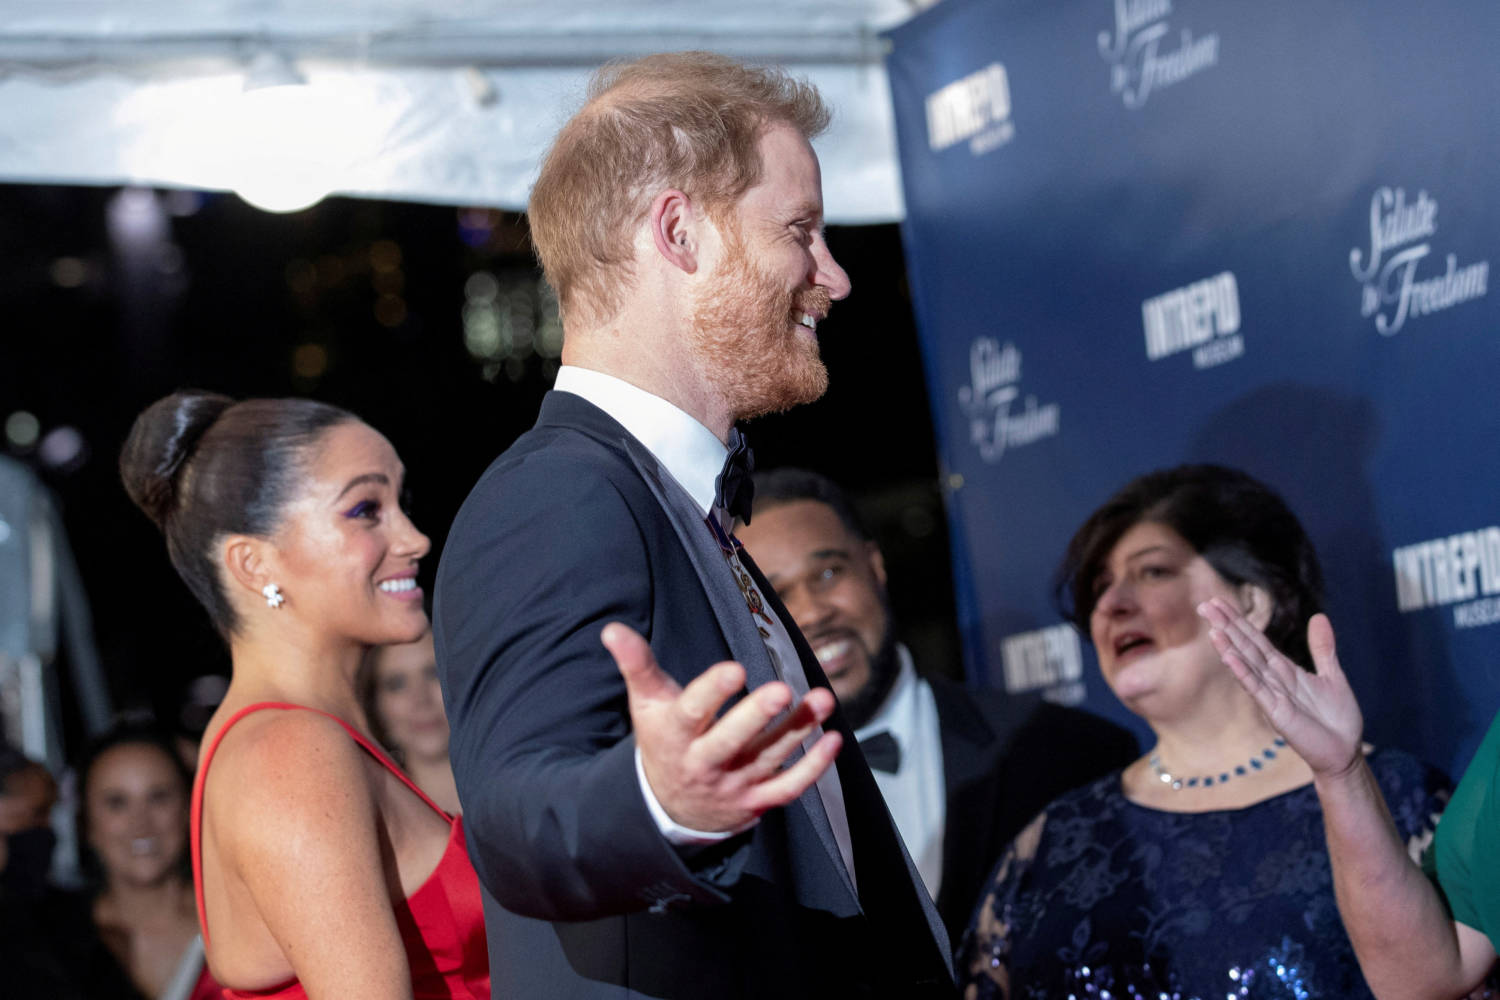 File Photo: Britain's Prince Harry And Meghan Markle, Duke And Duchess Of Sussex, At A Gala At The Intrepid Sea, Air & Space Museum In New York City, U.s.